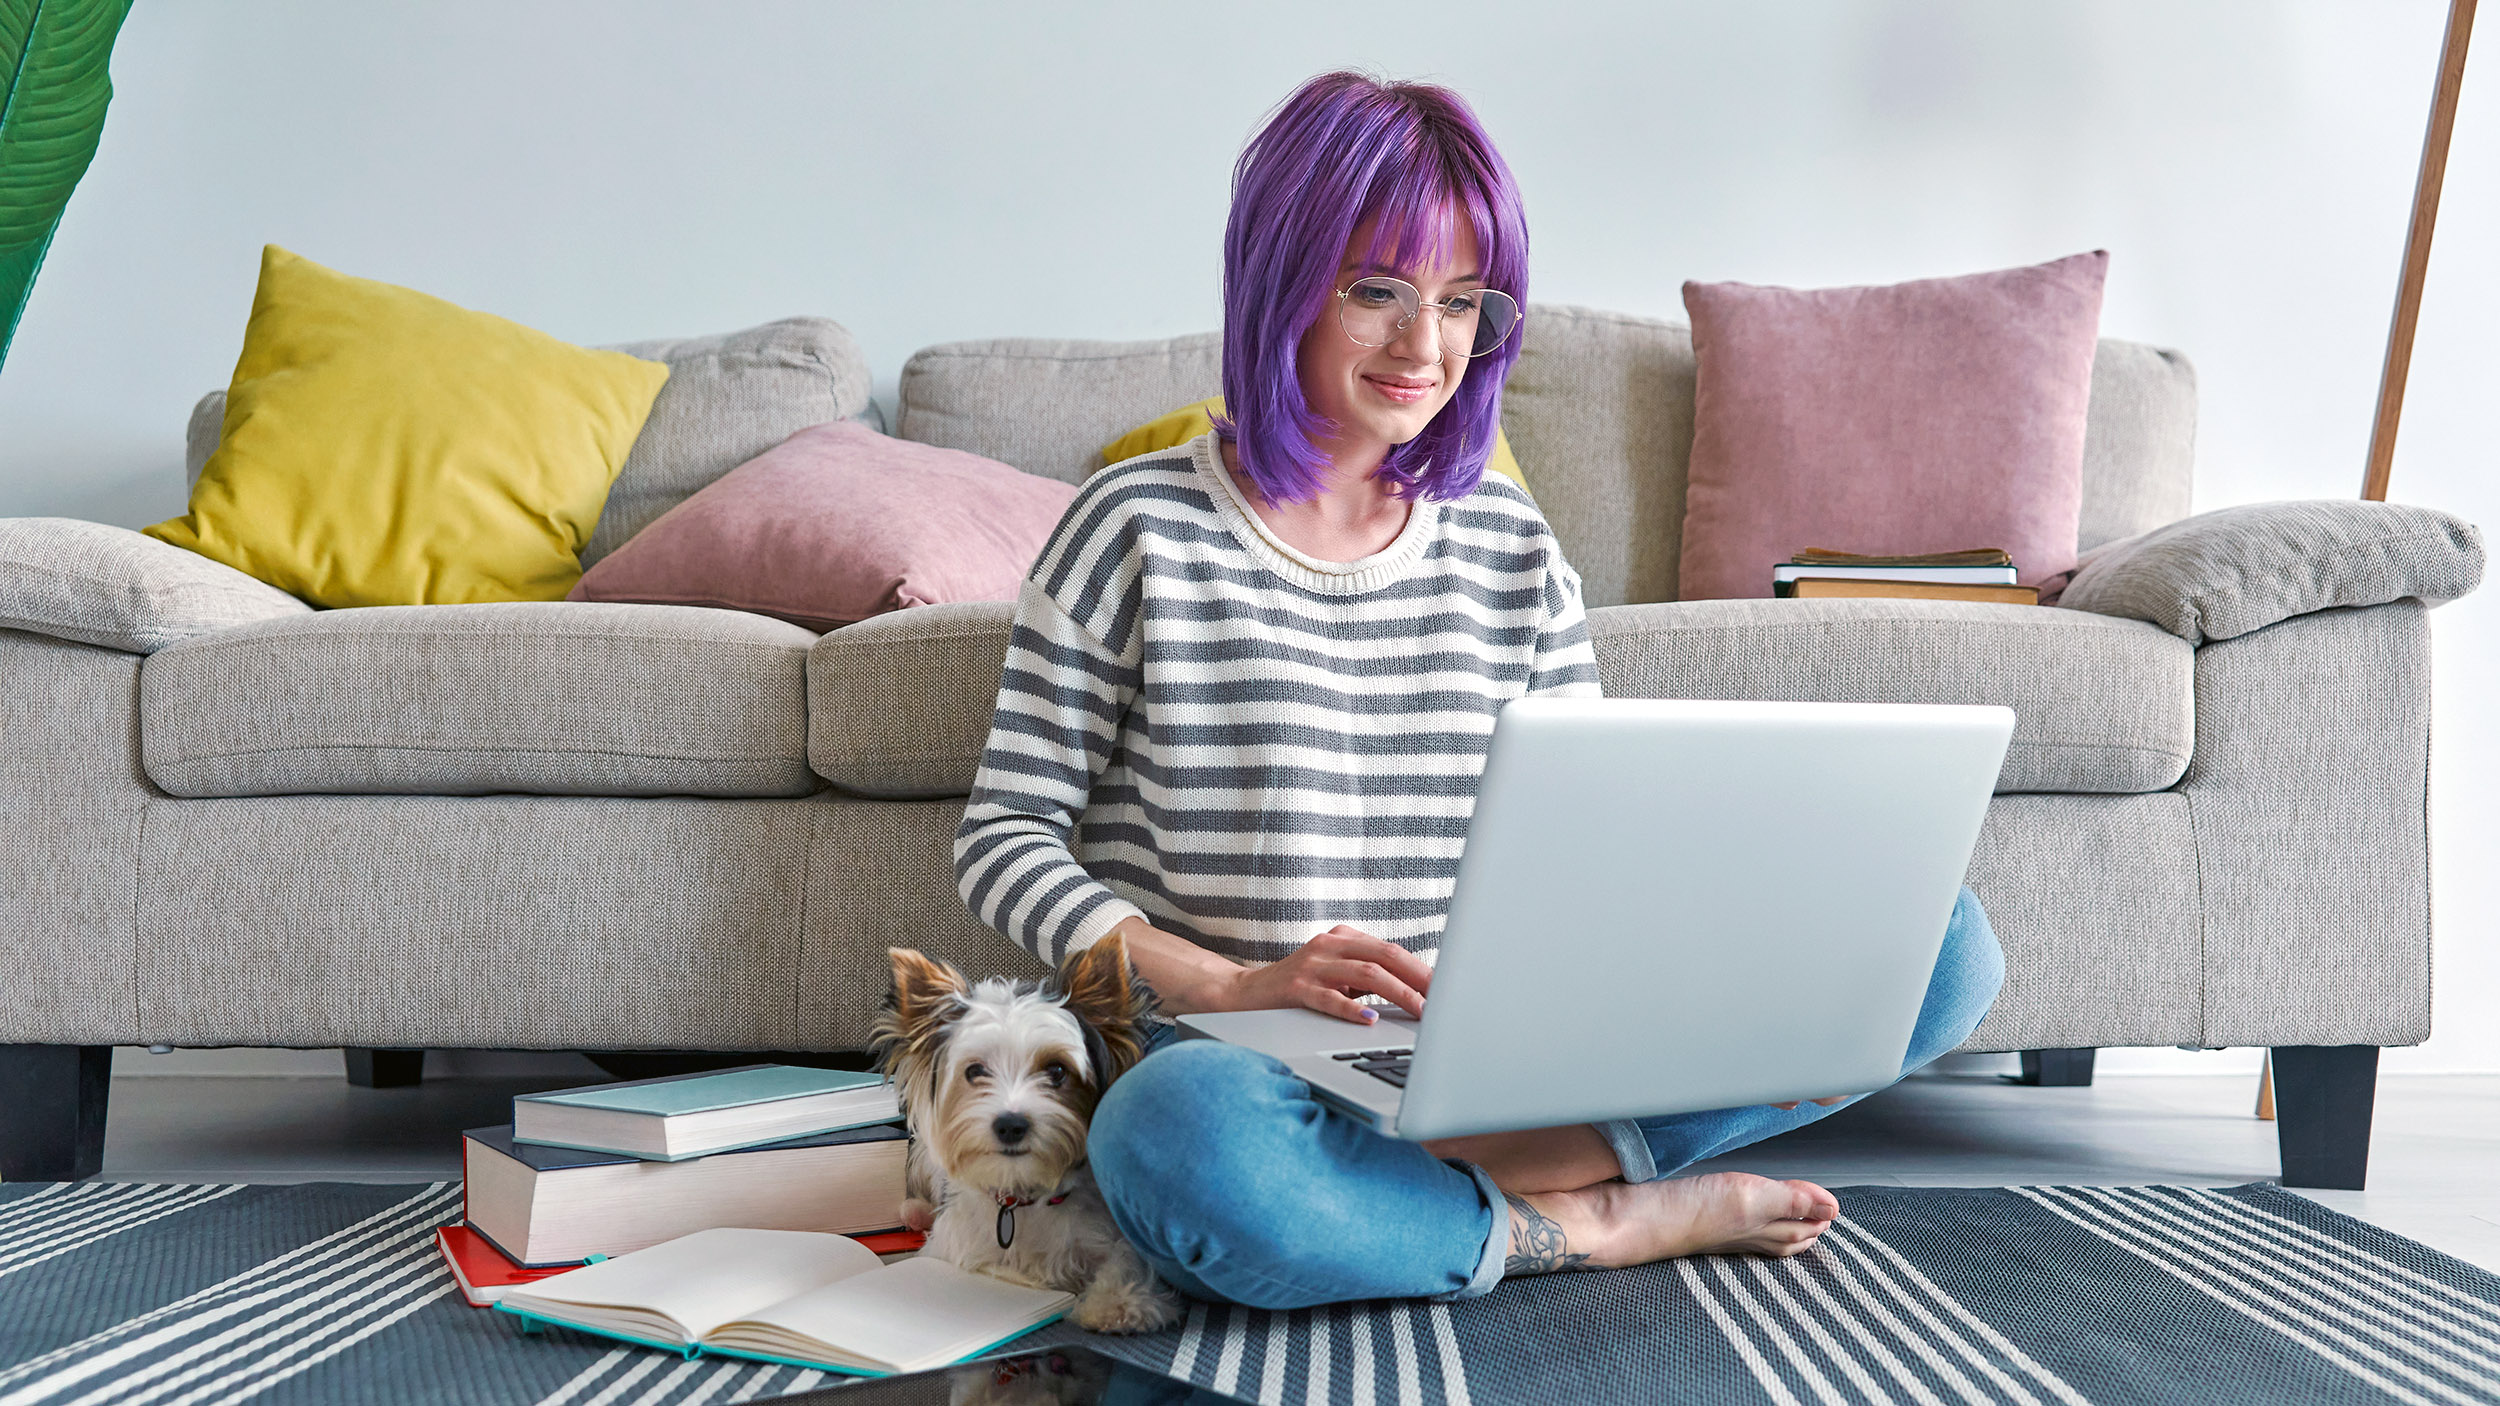 young woman with purple hair and a pet dog sit on the floor viewing a laptop